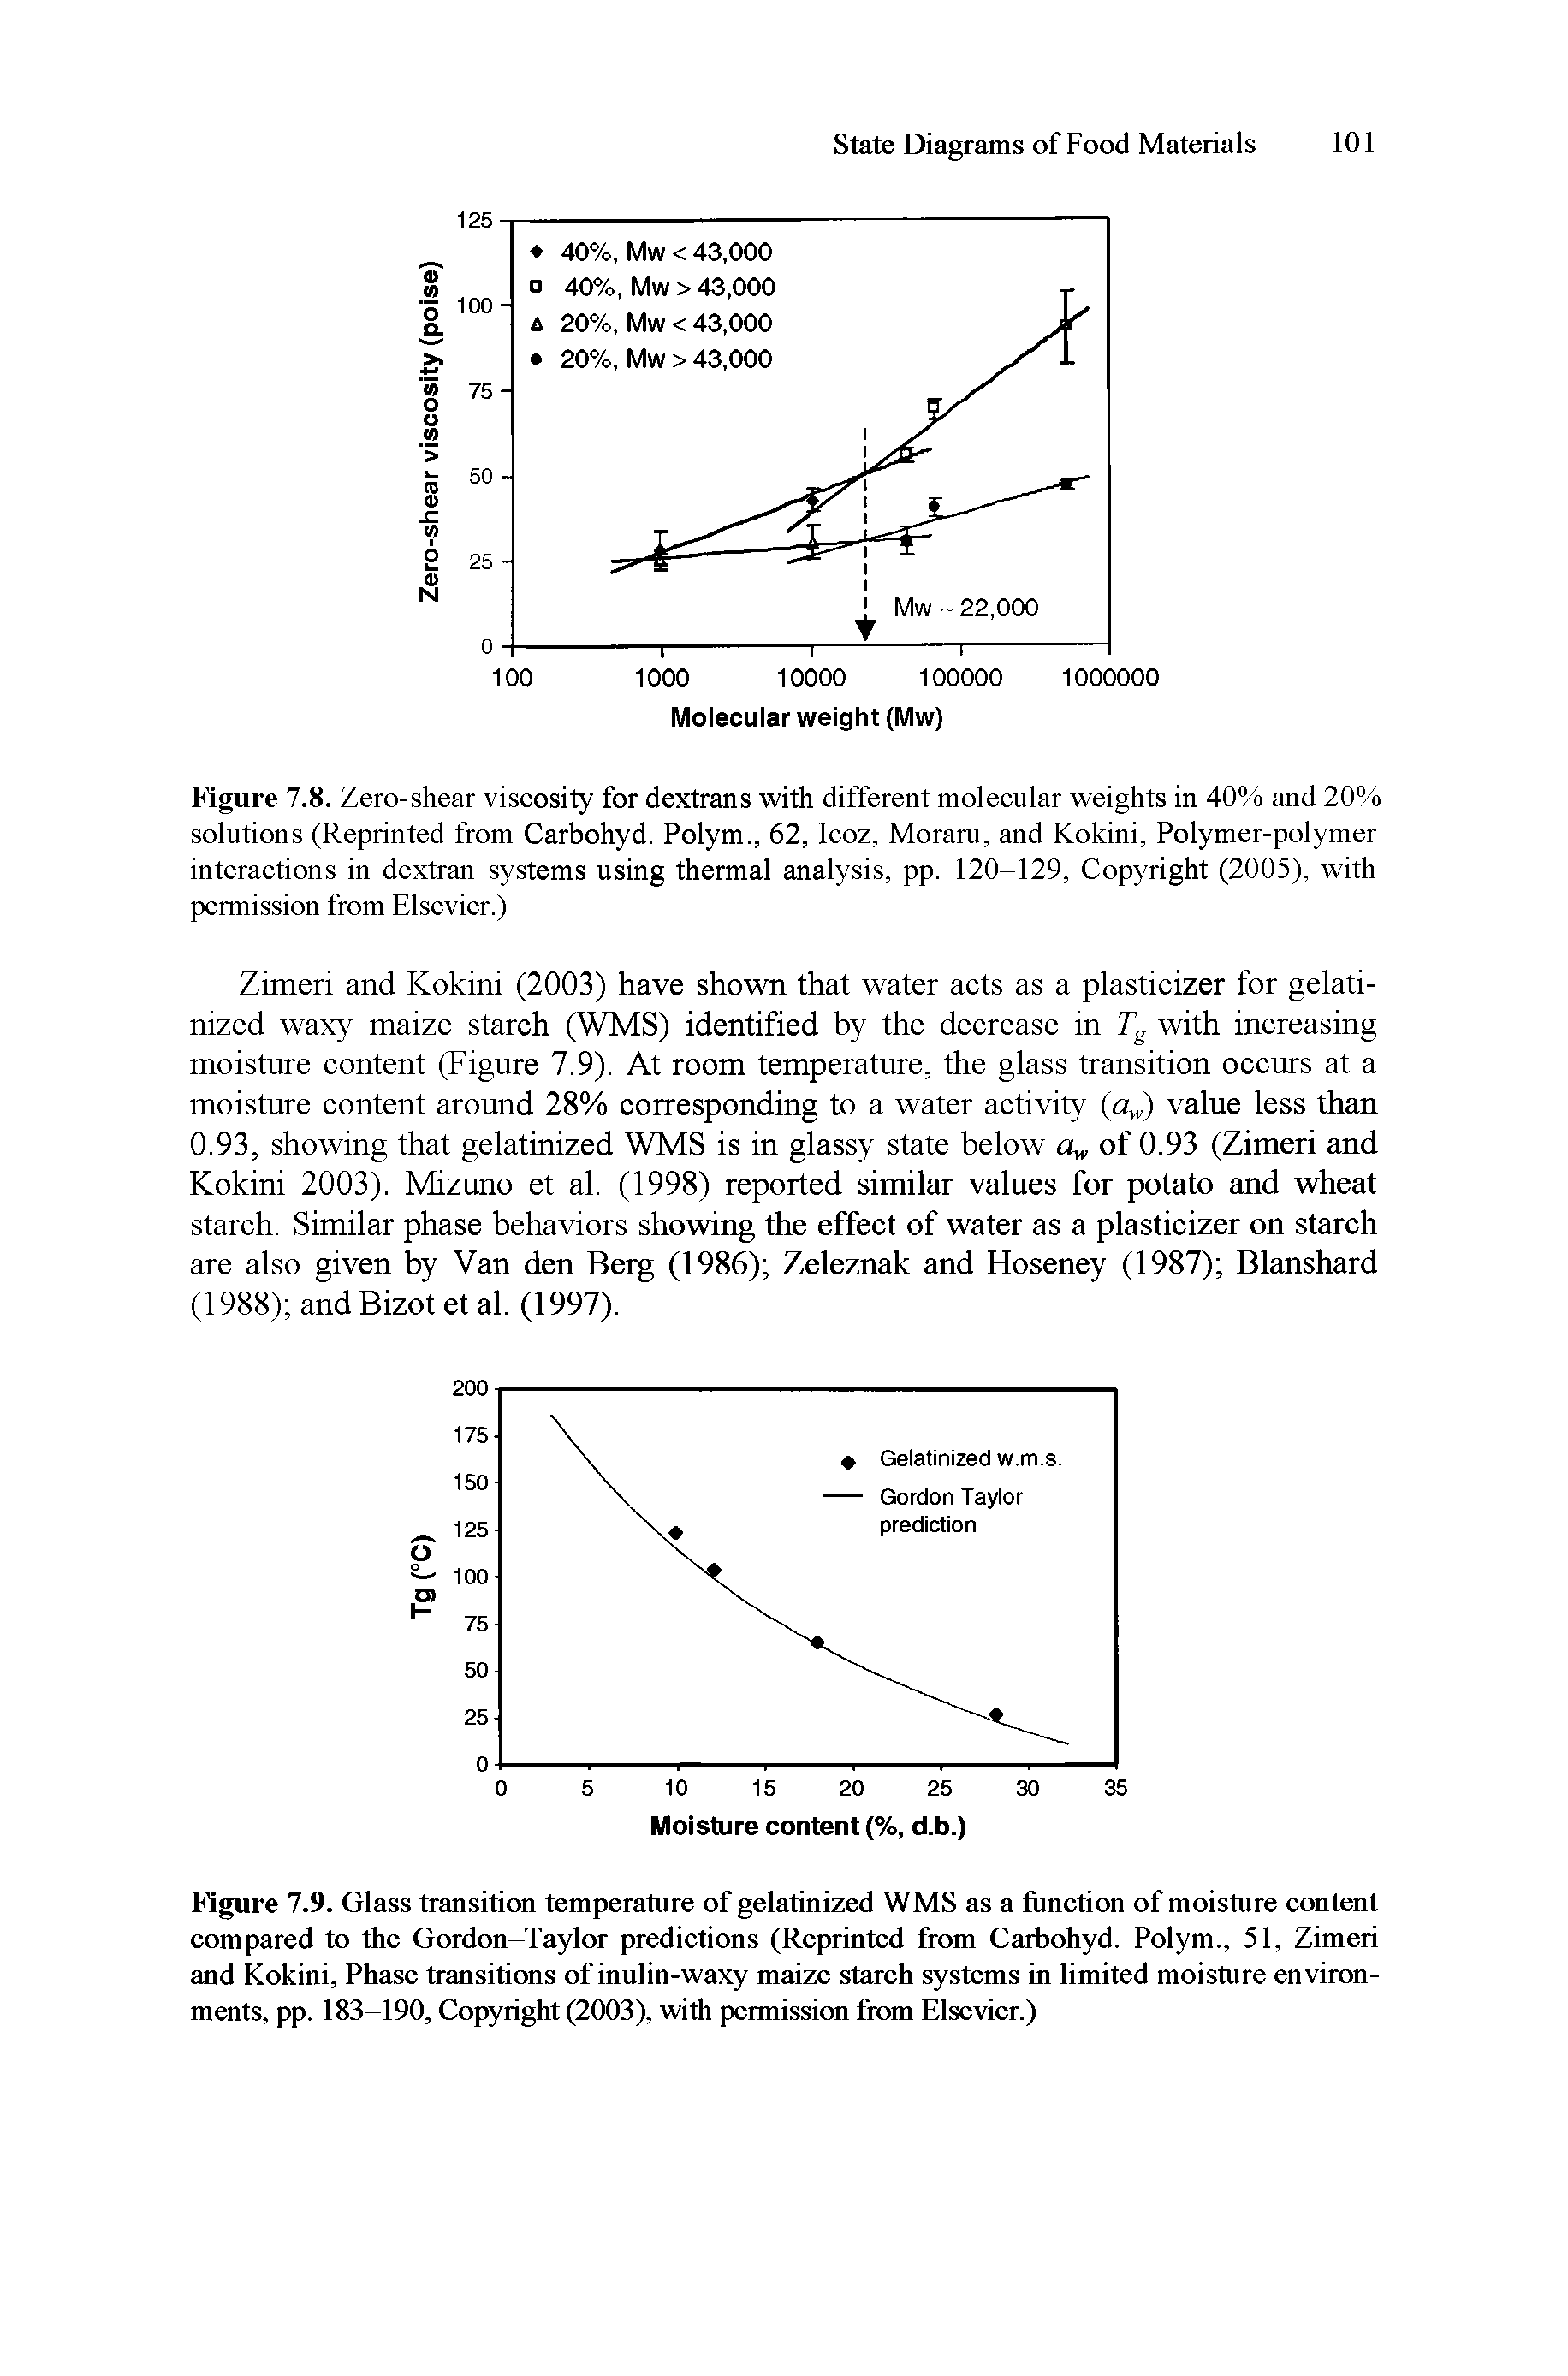 Figure 7.9. Glass transition temperature of gelatinized WMS as a fiinetion of moisture content compared to the Gordon-Taylor predictions (Reprinted from Carbohyd. Polym., 51, Zimeri and Kokini, Phase transitions of inulin-waxy maize starch systems in limited moisture environments, pp. 183-190, Copyright (2003), with permission from Elsevier.)...